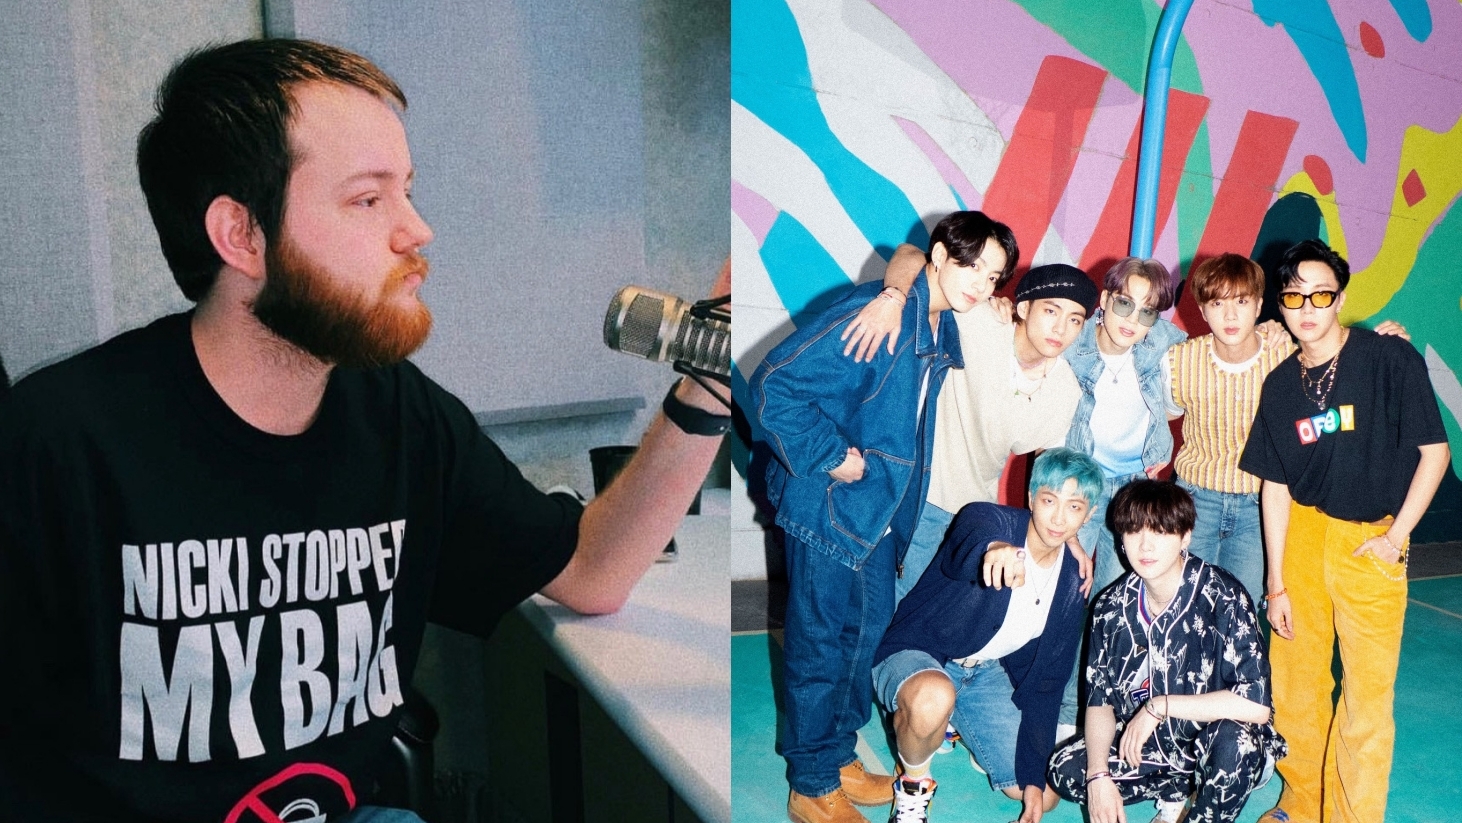 This American Music Writer Was Offered $3K To Give Bad Comments On BTS